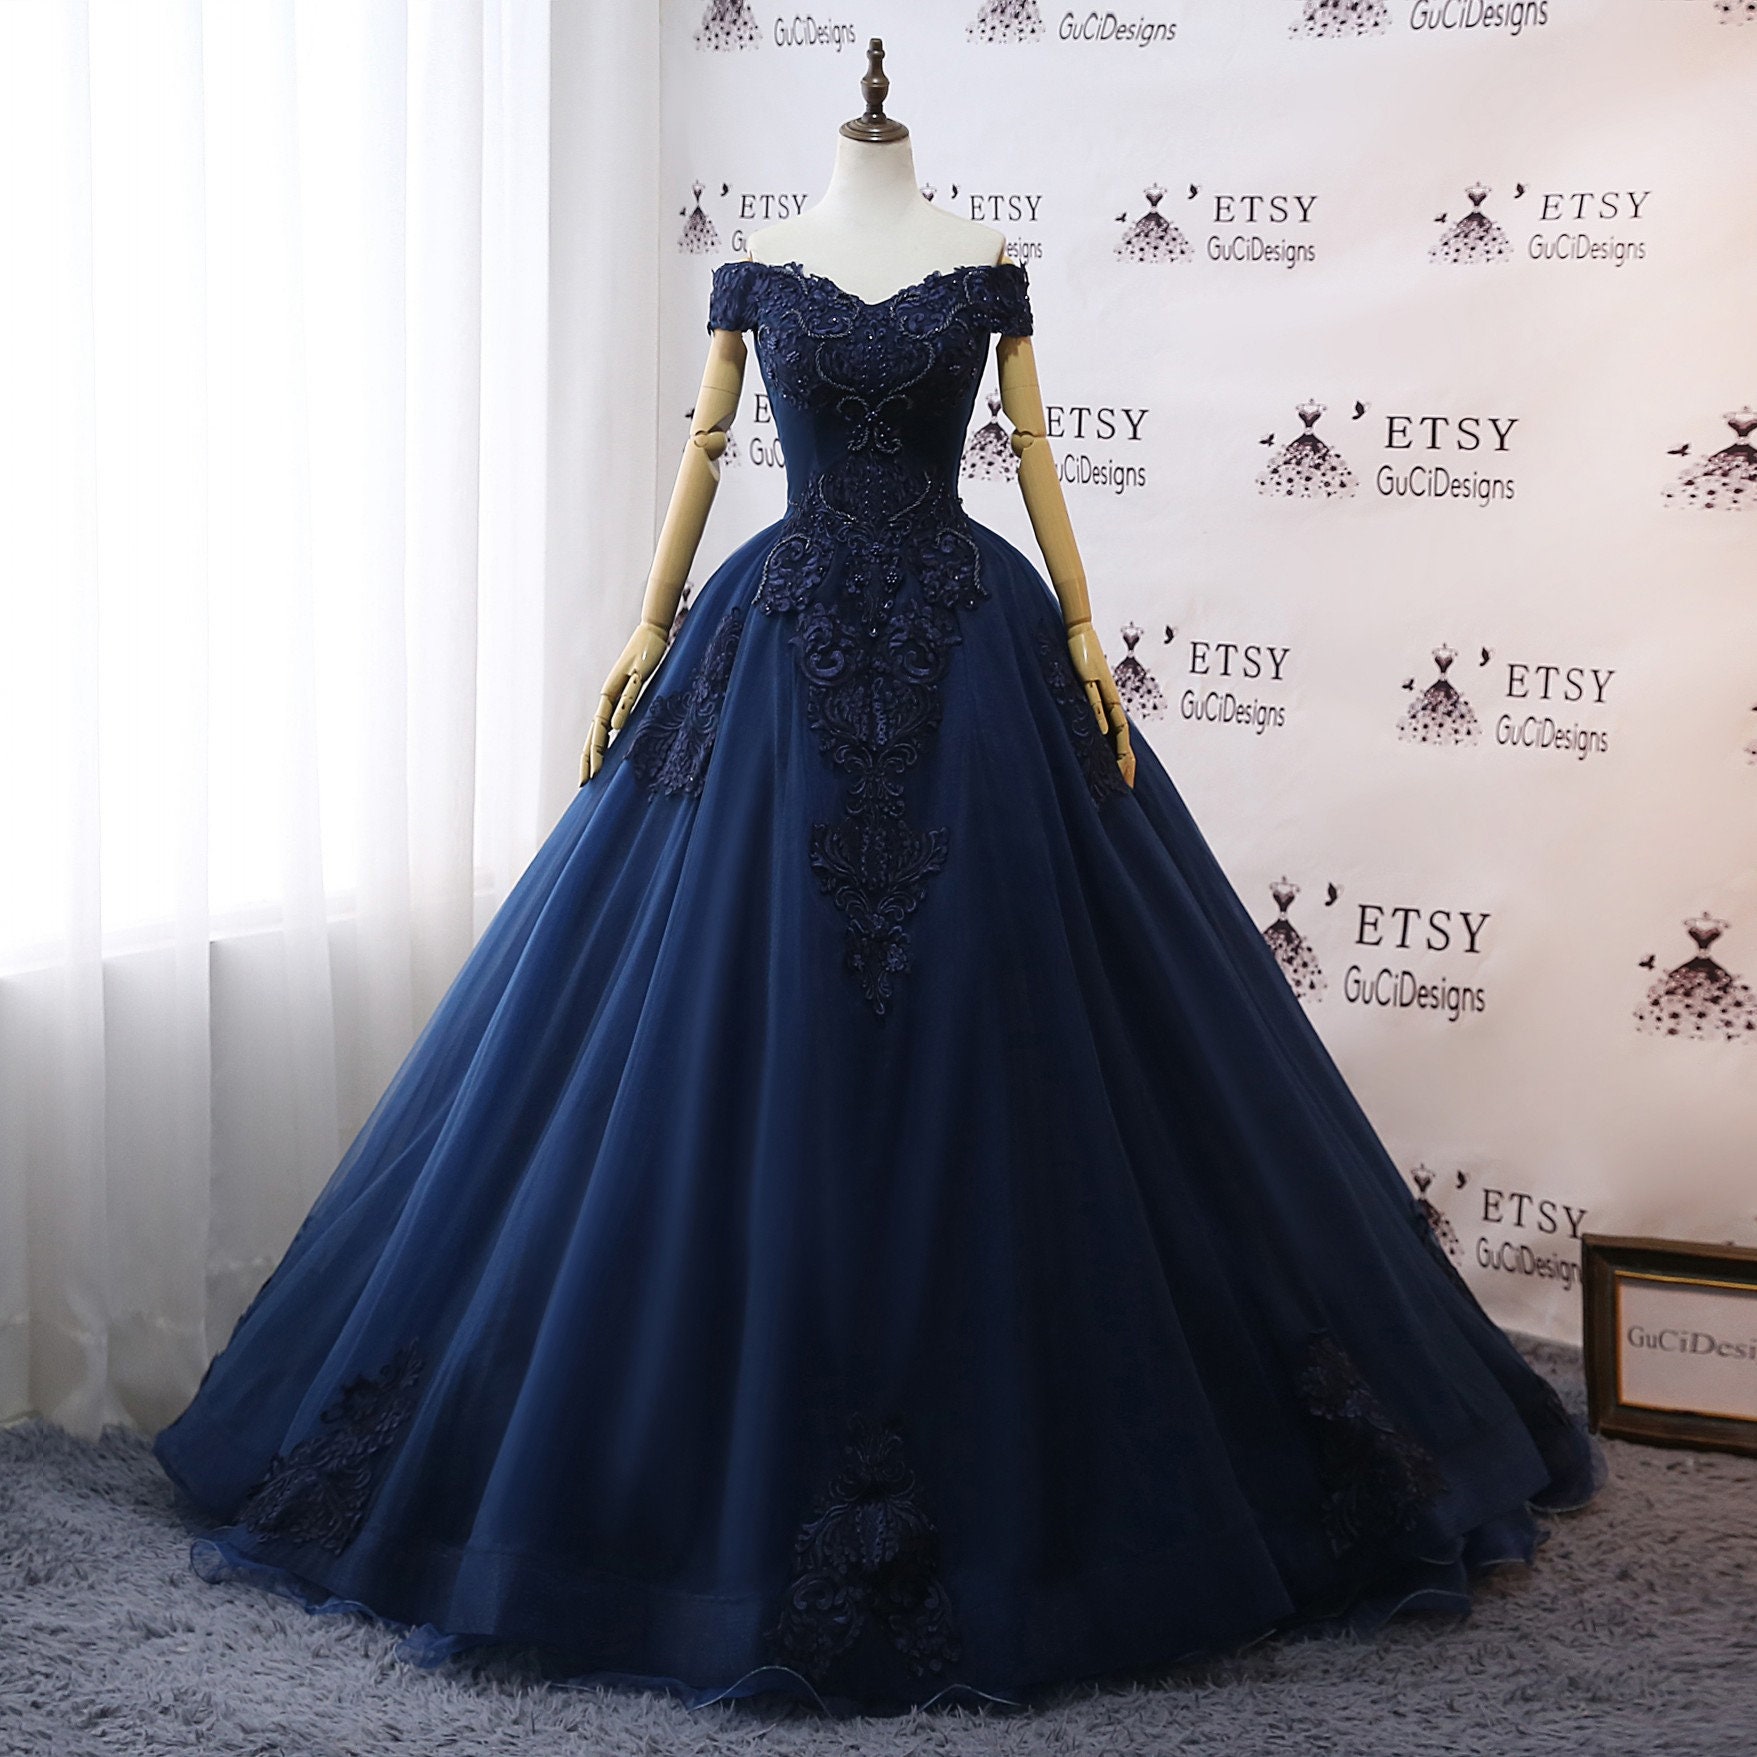 Prom Dresses Navy Blue Wedding Dresses Floral Lace Ball Gown Etsy